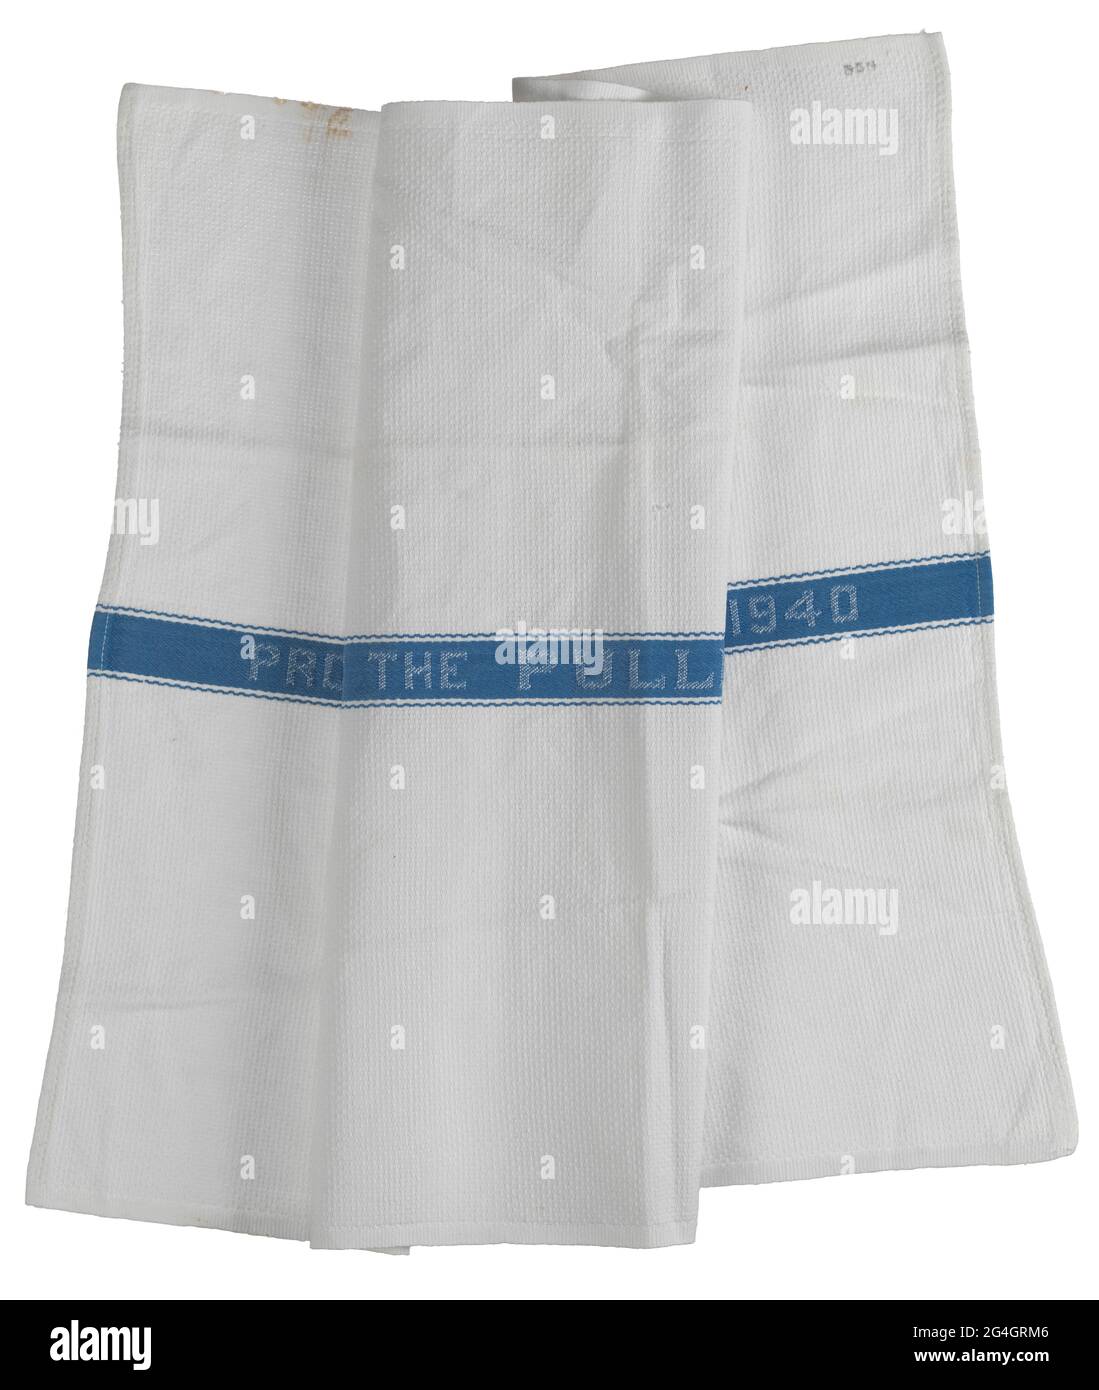 White cotton with a small basket weave patterned rectangular Pullman Company towel. At the center of the towel is a blue fabric band with a small curved line decorative stitched boarder. Stitched in white thread at the center of the blue band is: &quot;PROPERTY OF THE PULLMAN COMPANY 1940&quot;. Stock Photo